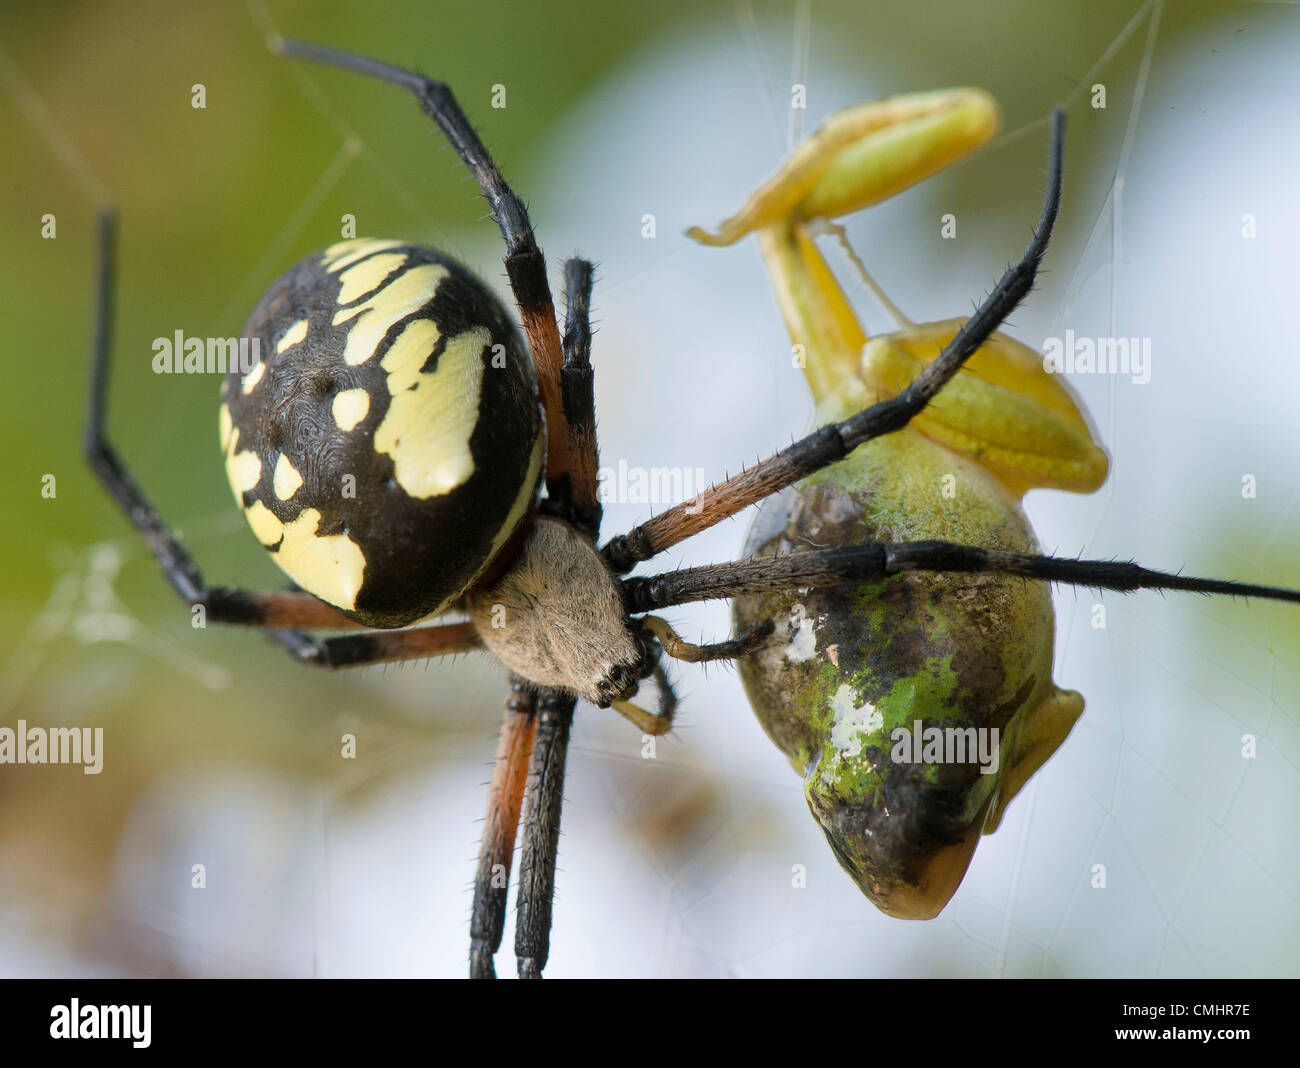 Aug. 12, 2012 - Roseburg, Oregon, U.S - A large black and yellow garden spider uses her acidic saliva and stomach acids to liquify a Pacific tree frog as she consumes it in her web strung in a blackberry thicket along a seasonal creek near Roseburg. (Credit Image: © Robin Loznak/ZUMAPRESS.com) Stock Photo